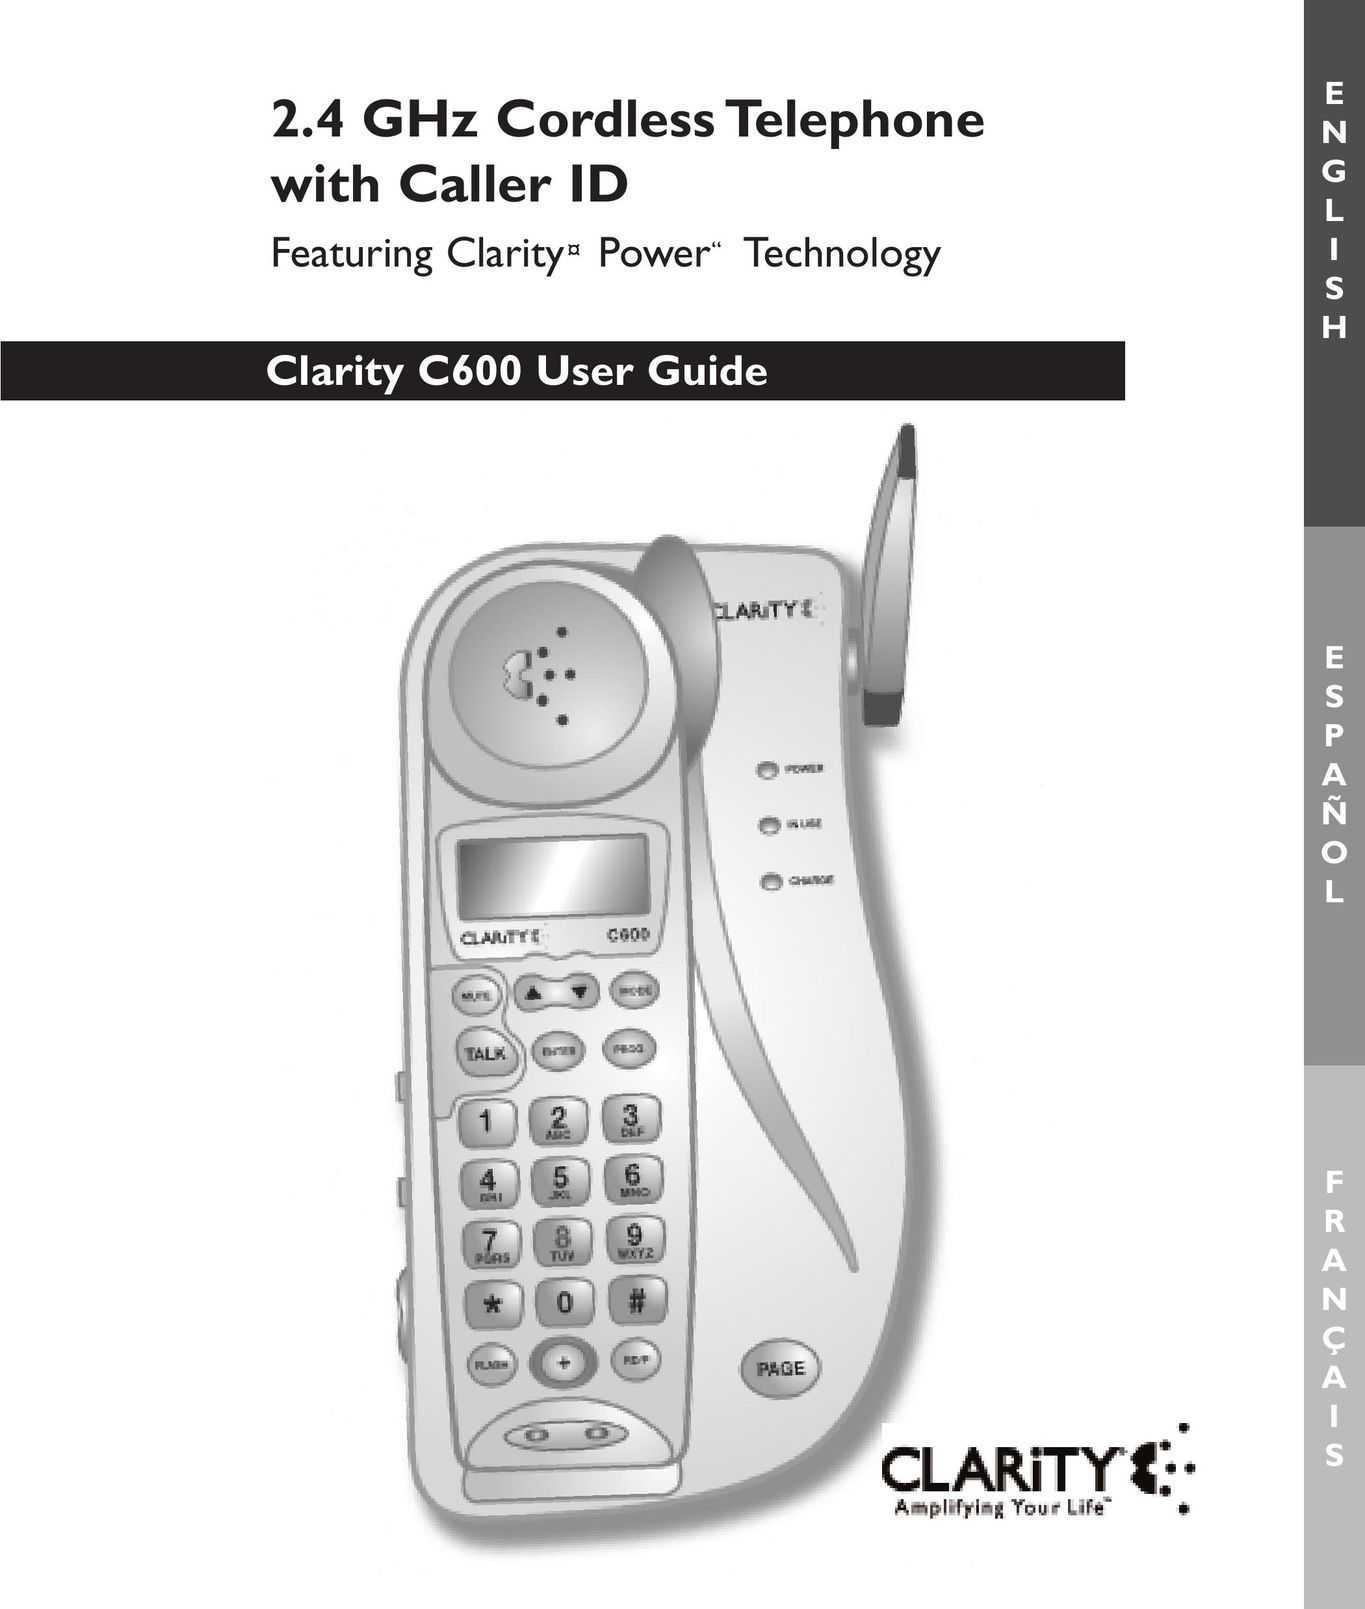 Clarity C600 Cordless Telephone User Manual (Page 1)